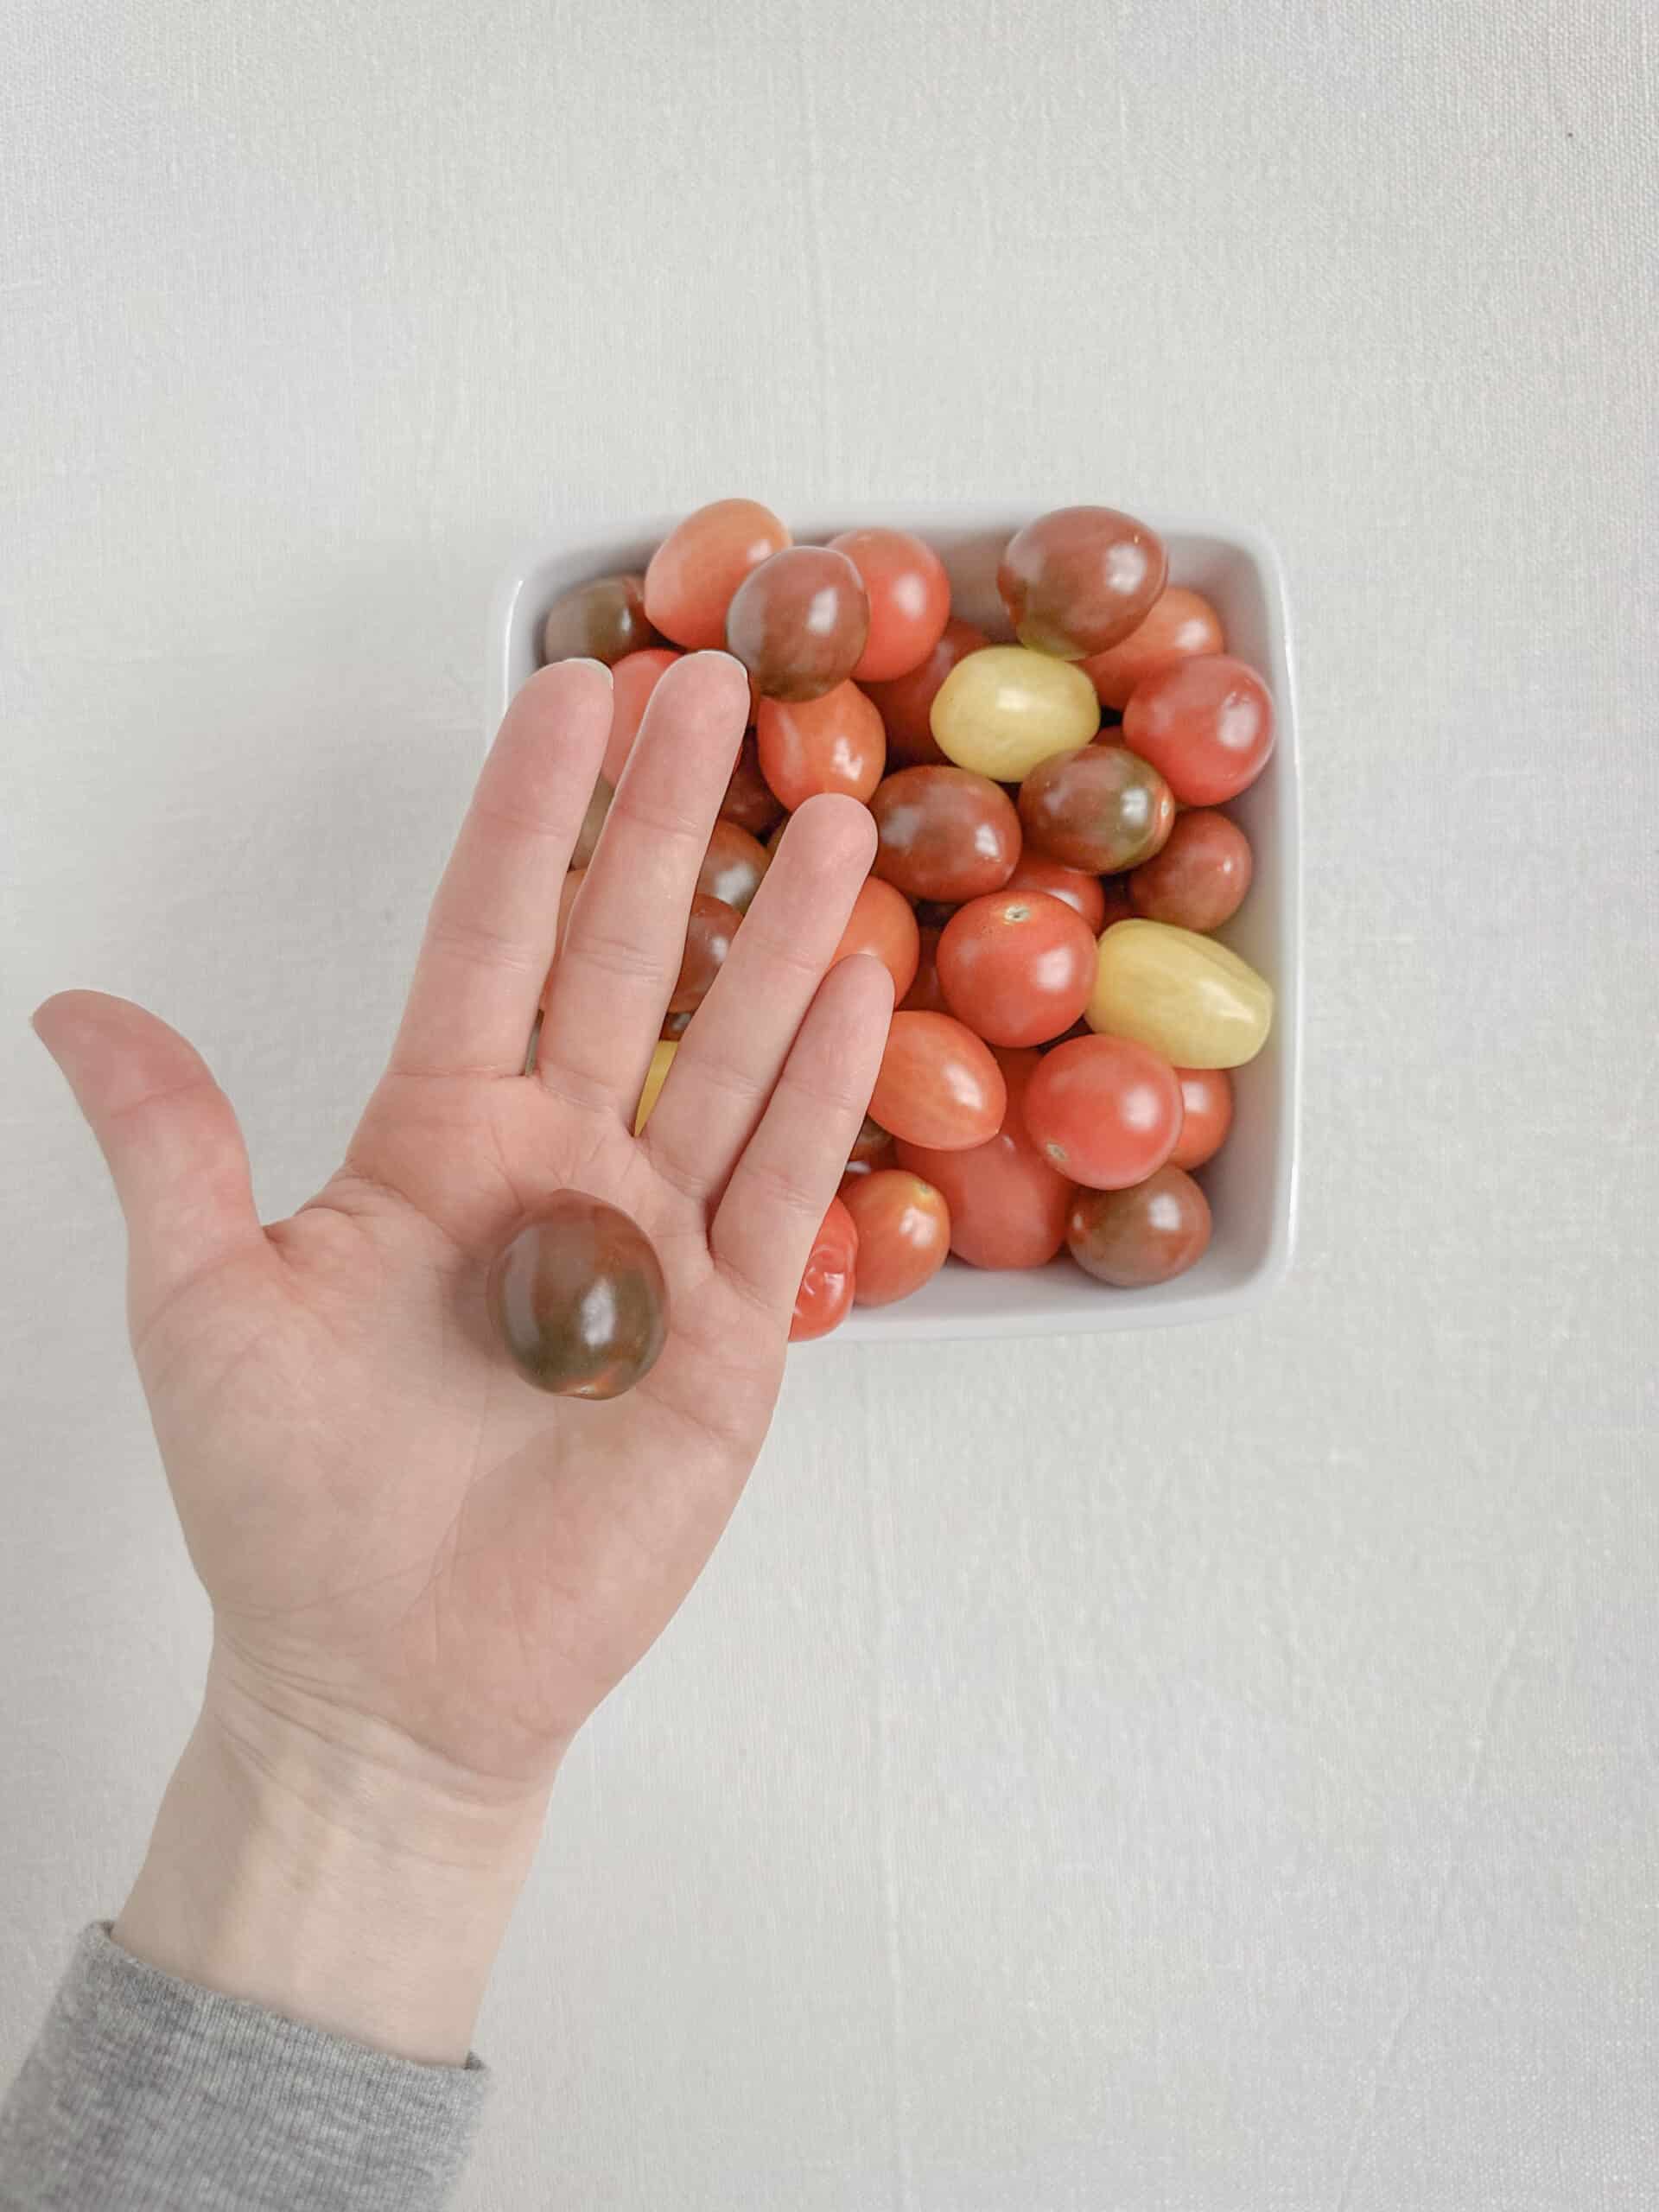 cherry tomatoes in my hands before they're roasted